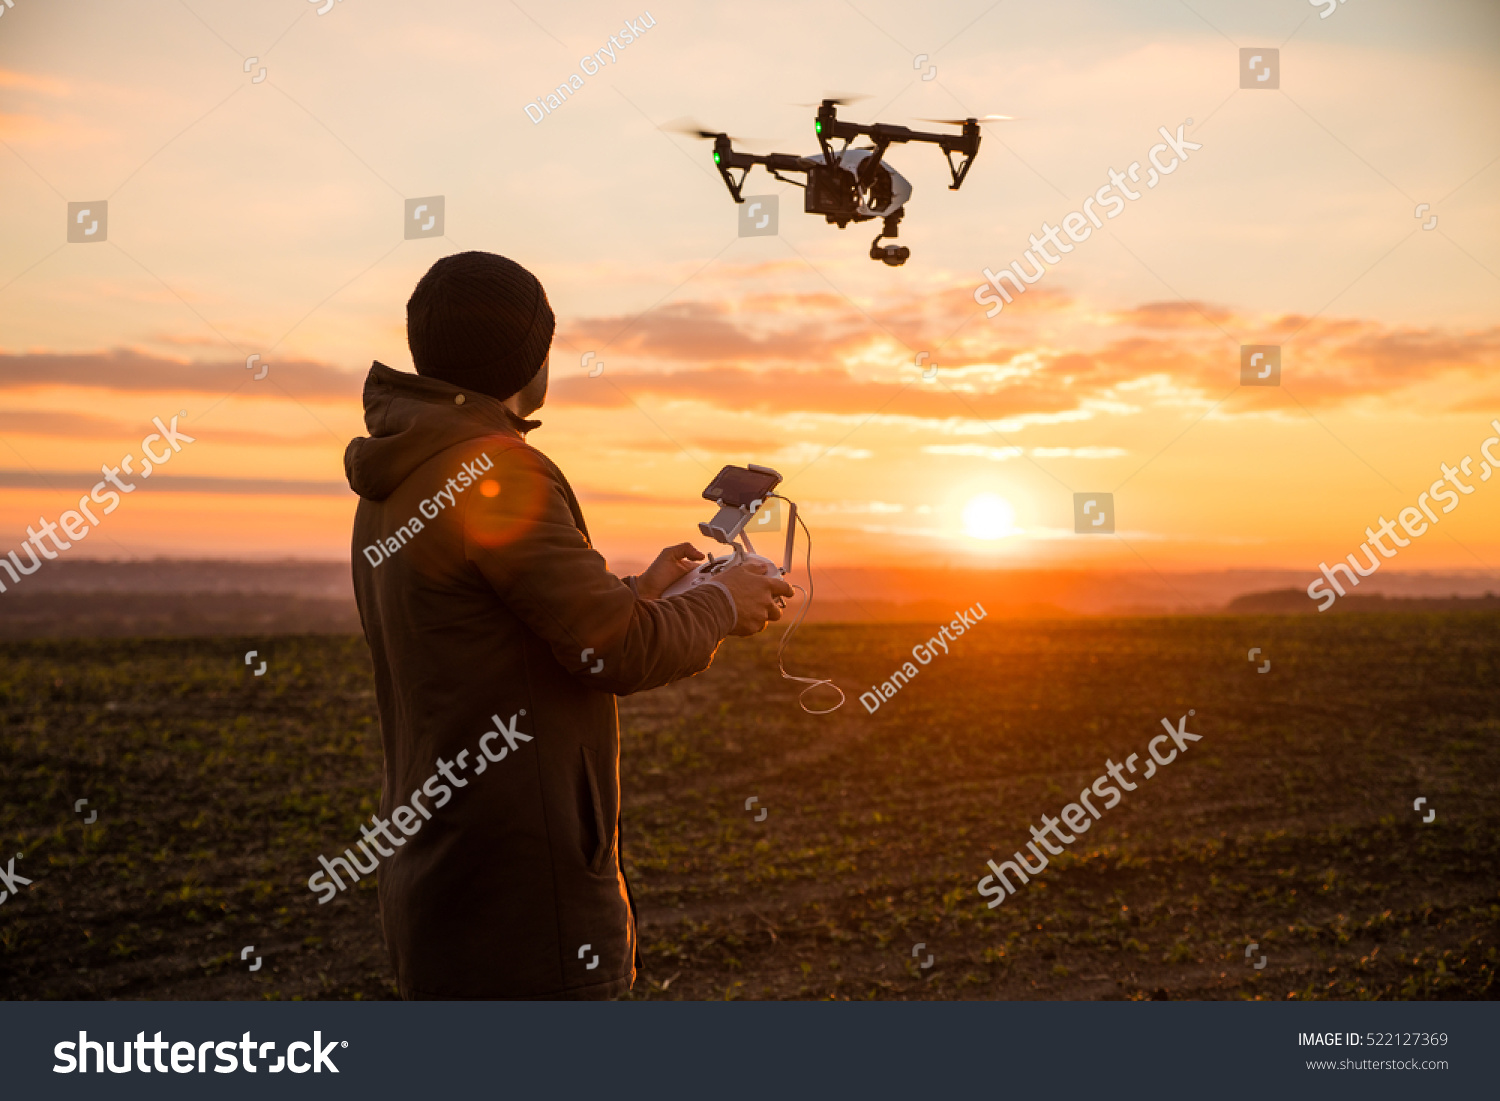 Man operating a drone with remote control. Dark silhouette against colorful sunset. Soft focus. #522127369